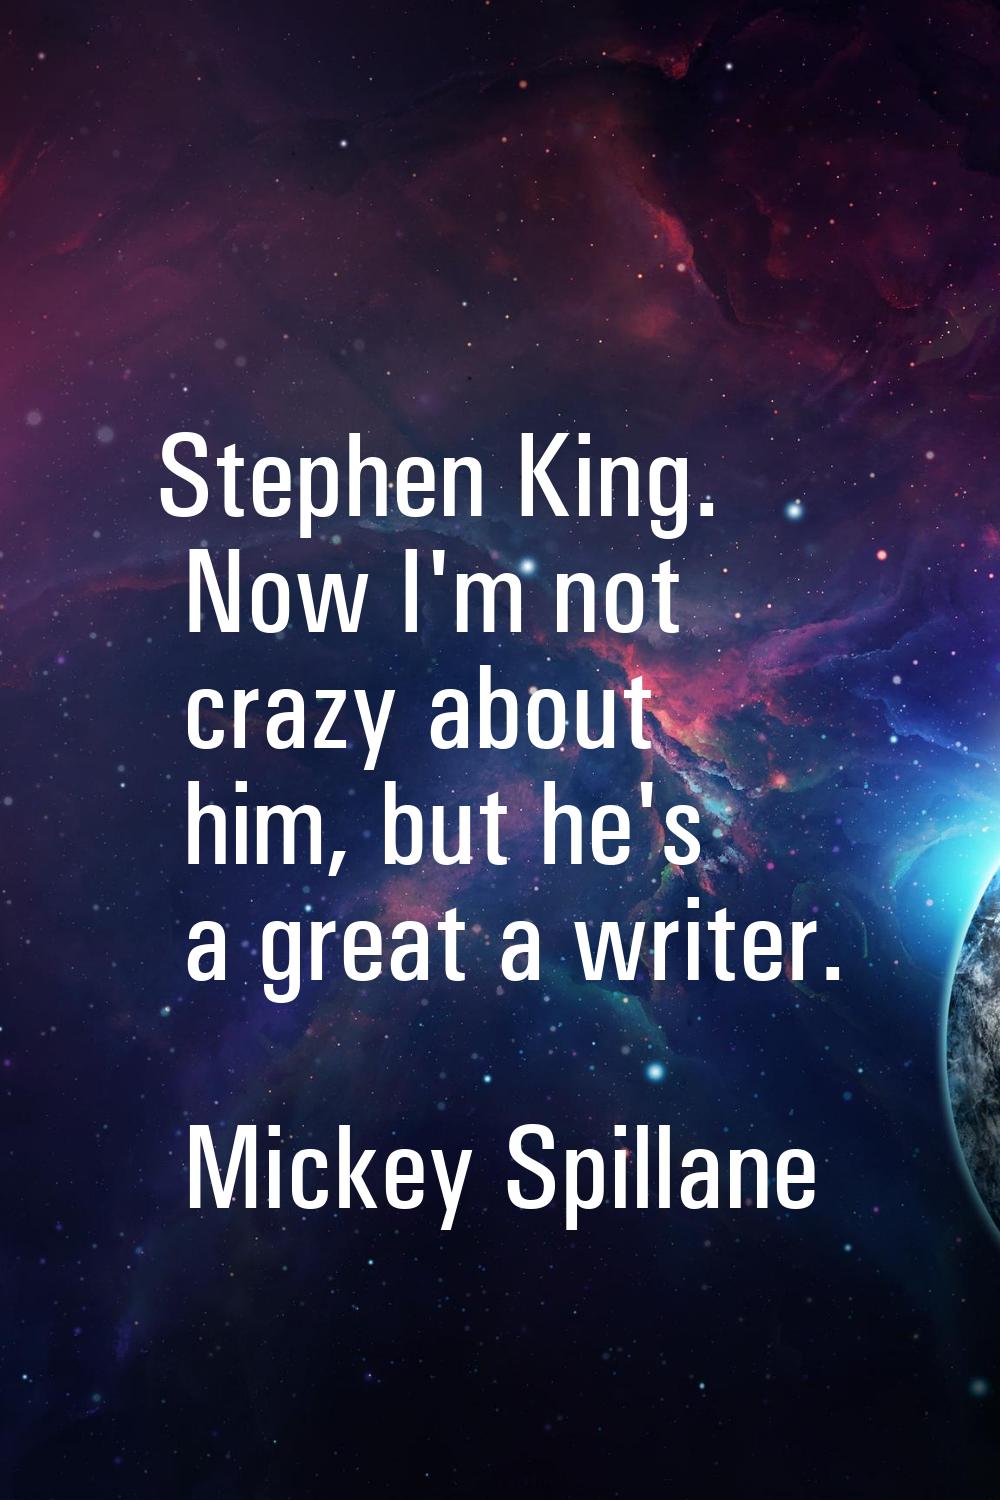 Stephen King. Now I'm not crazy about him, but he's a great a writer.